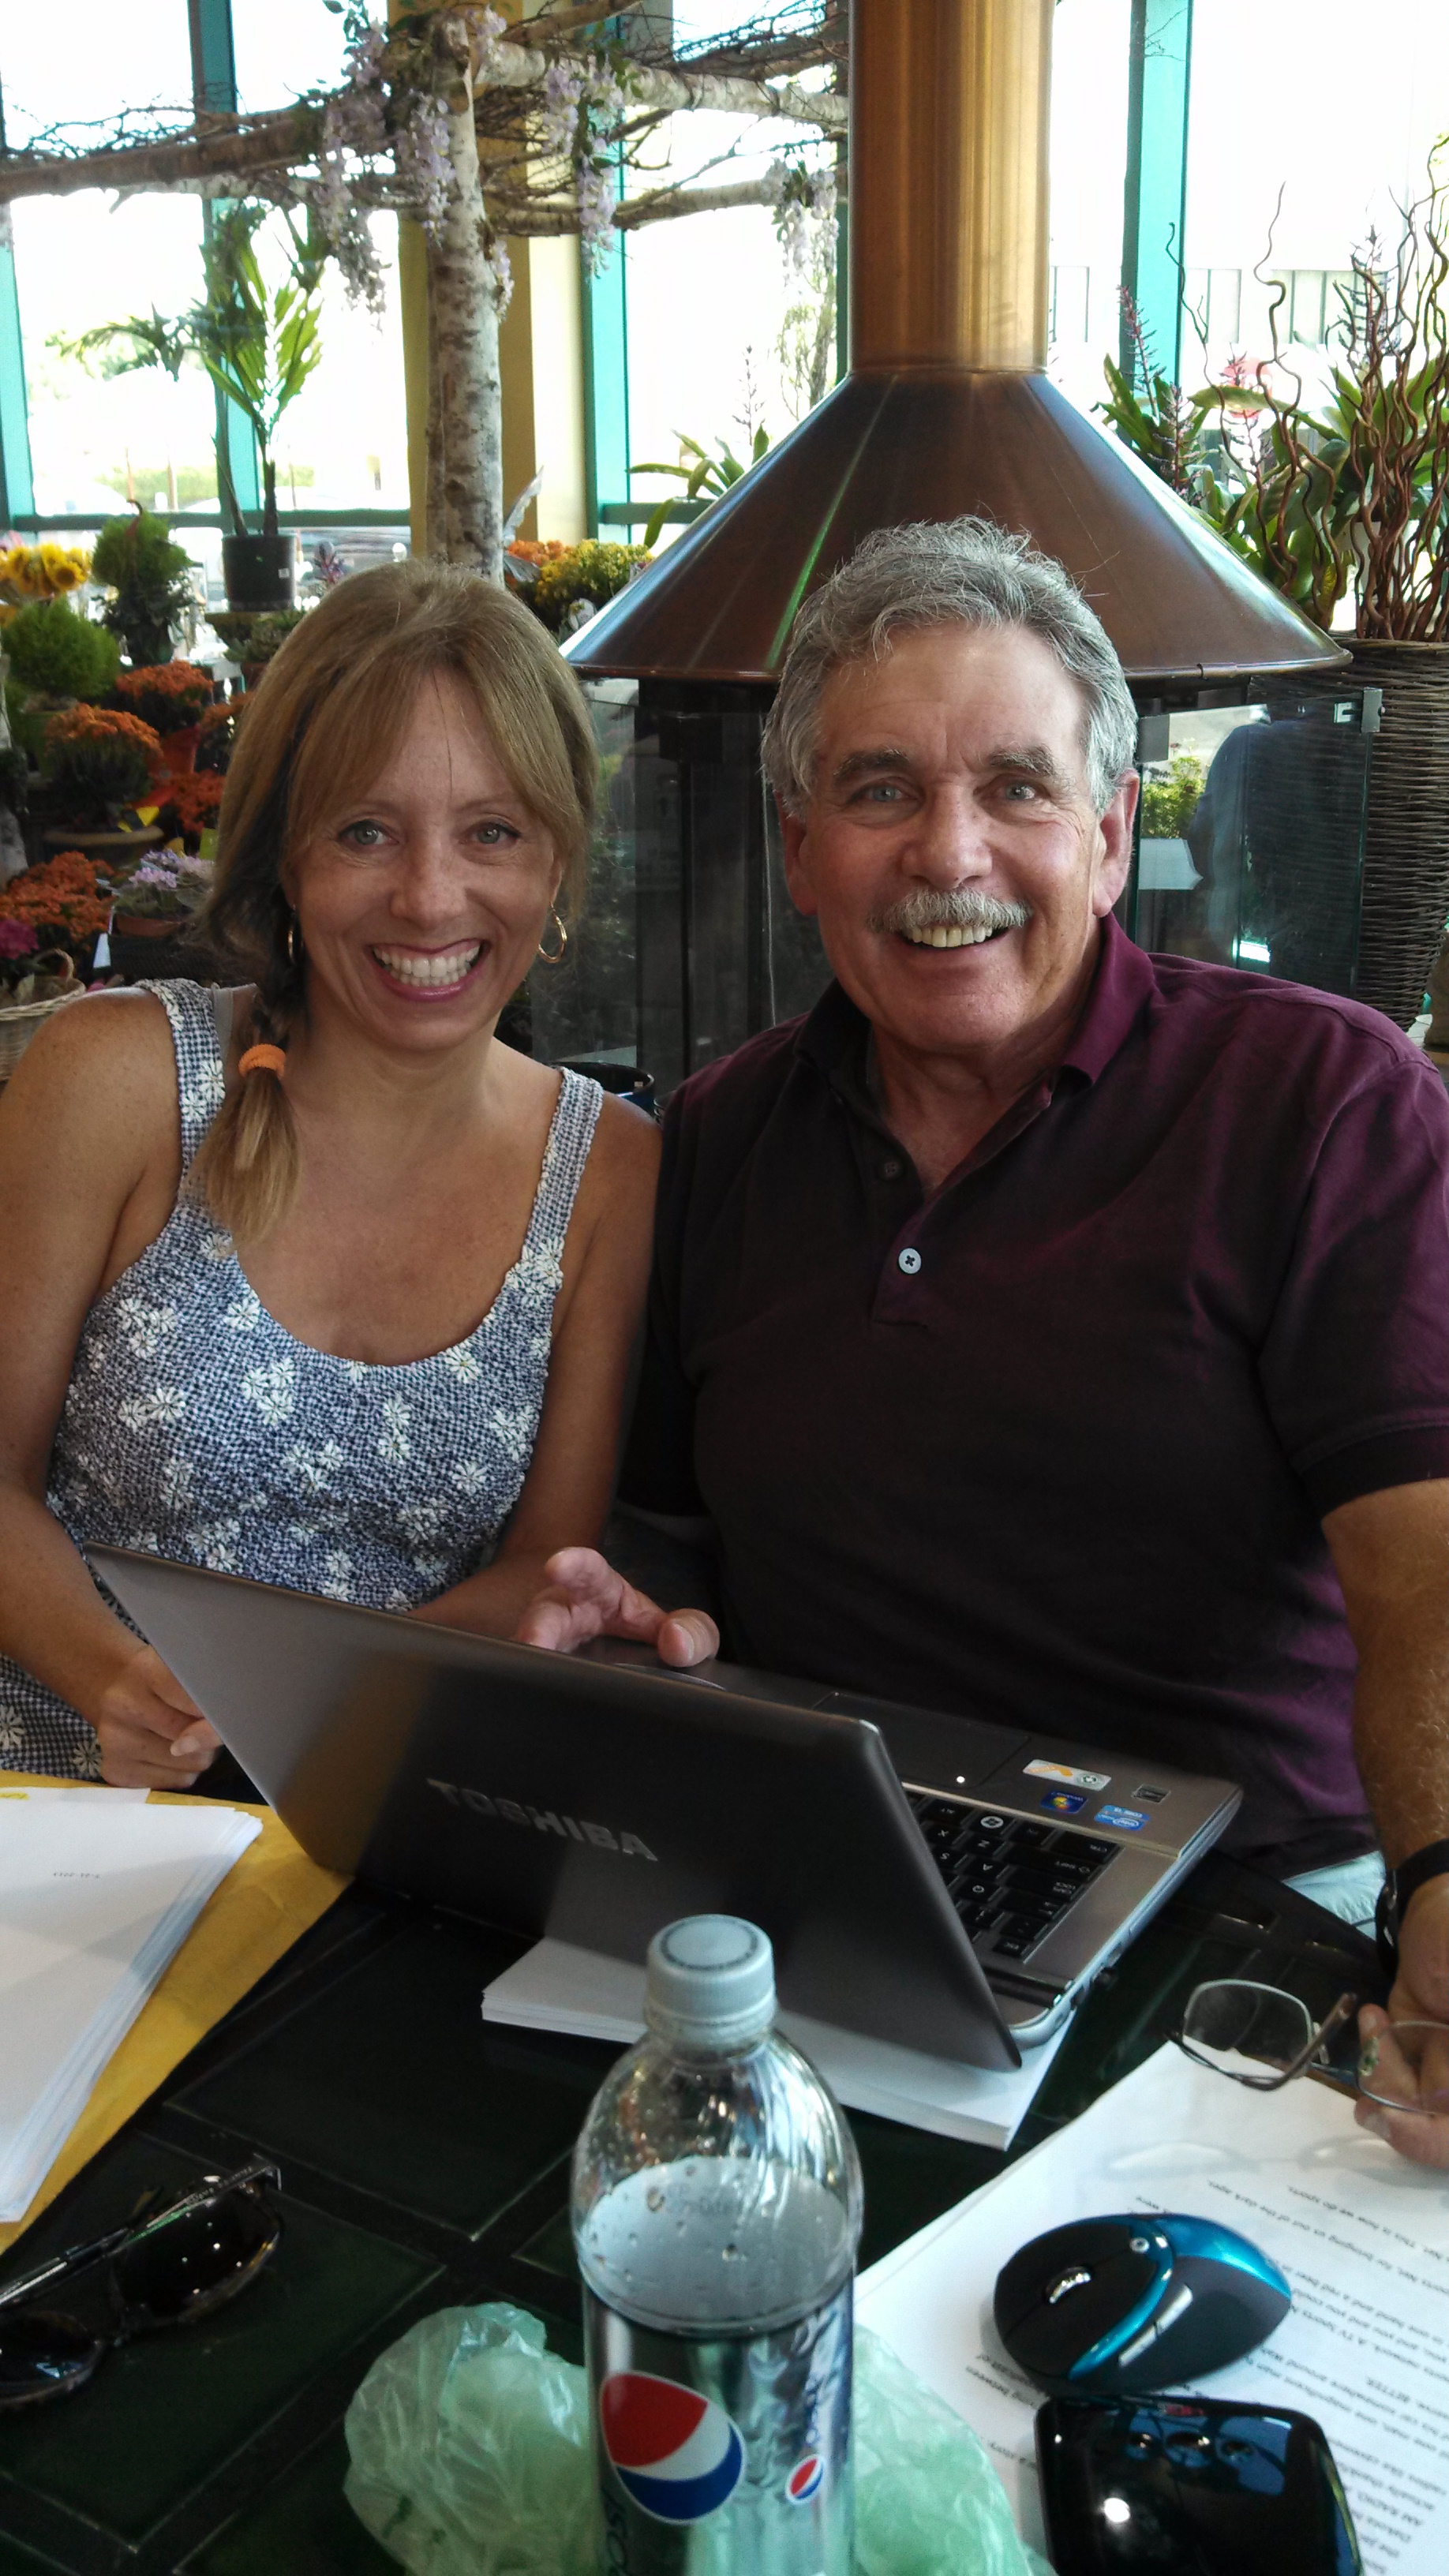 Our lead actress, Shelley Christl, and me working on the script for our film 